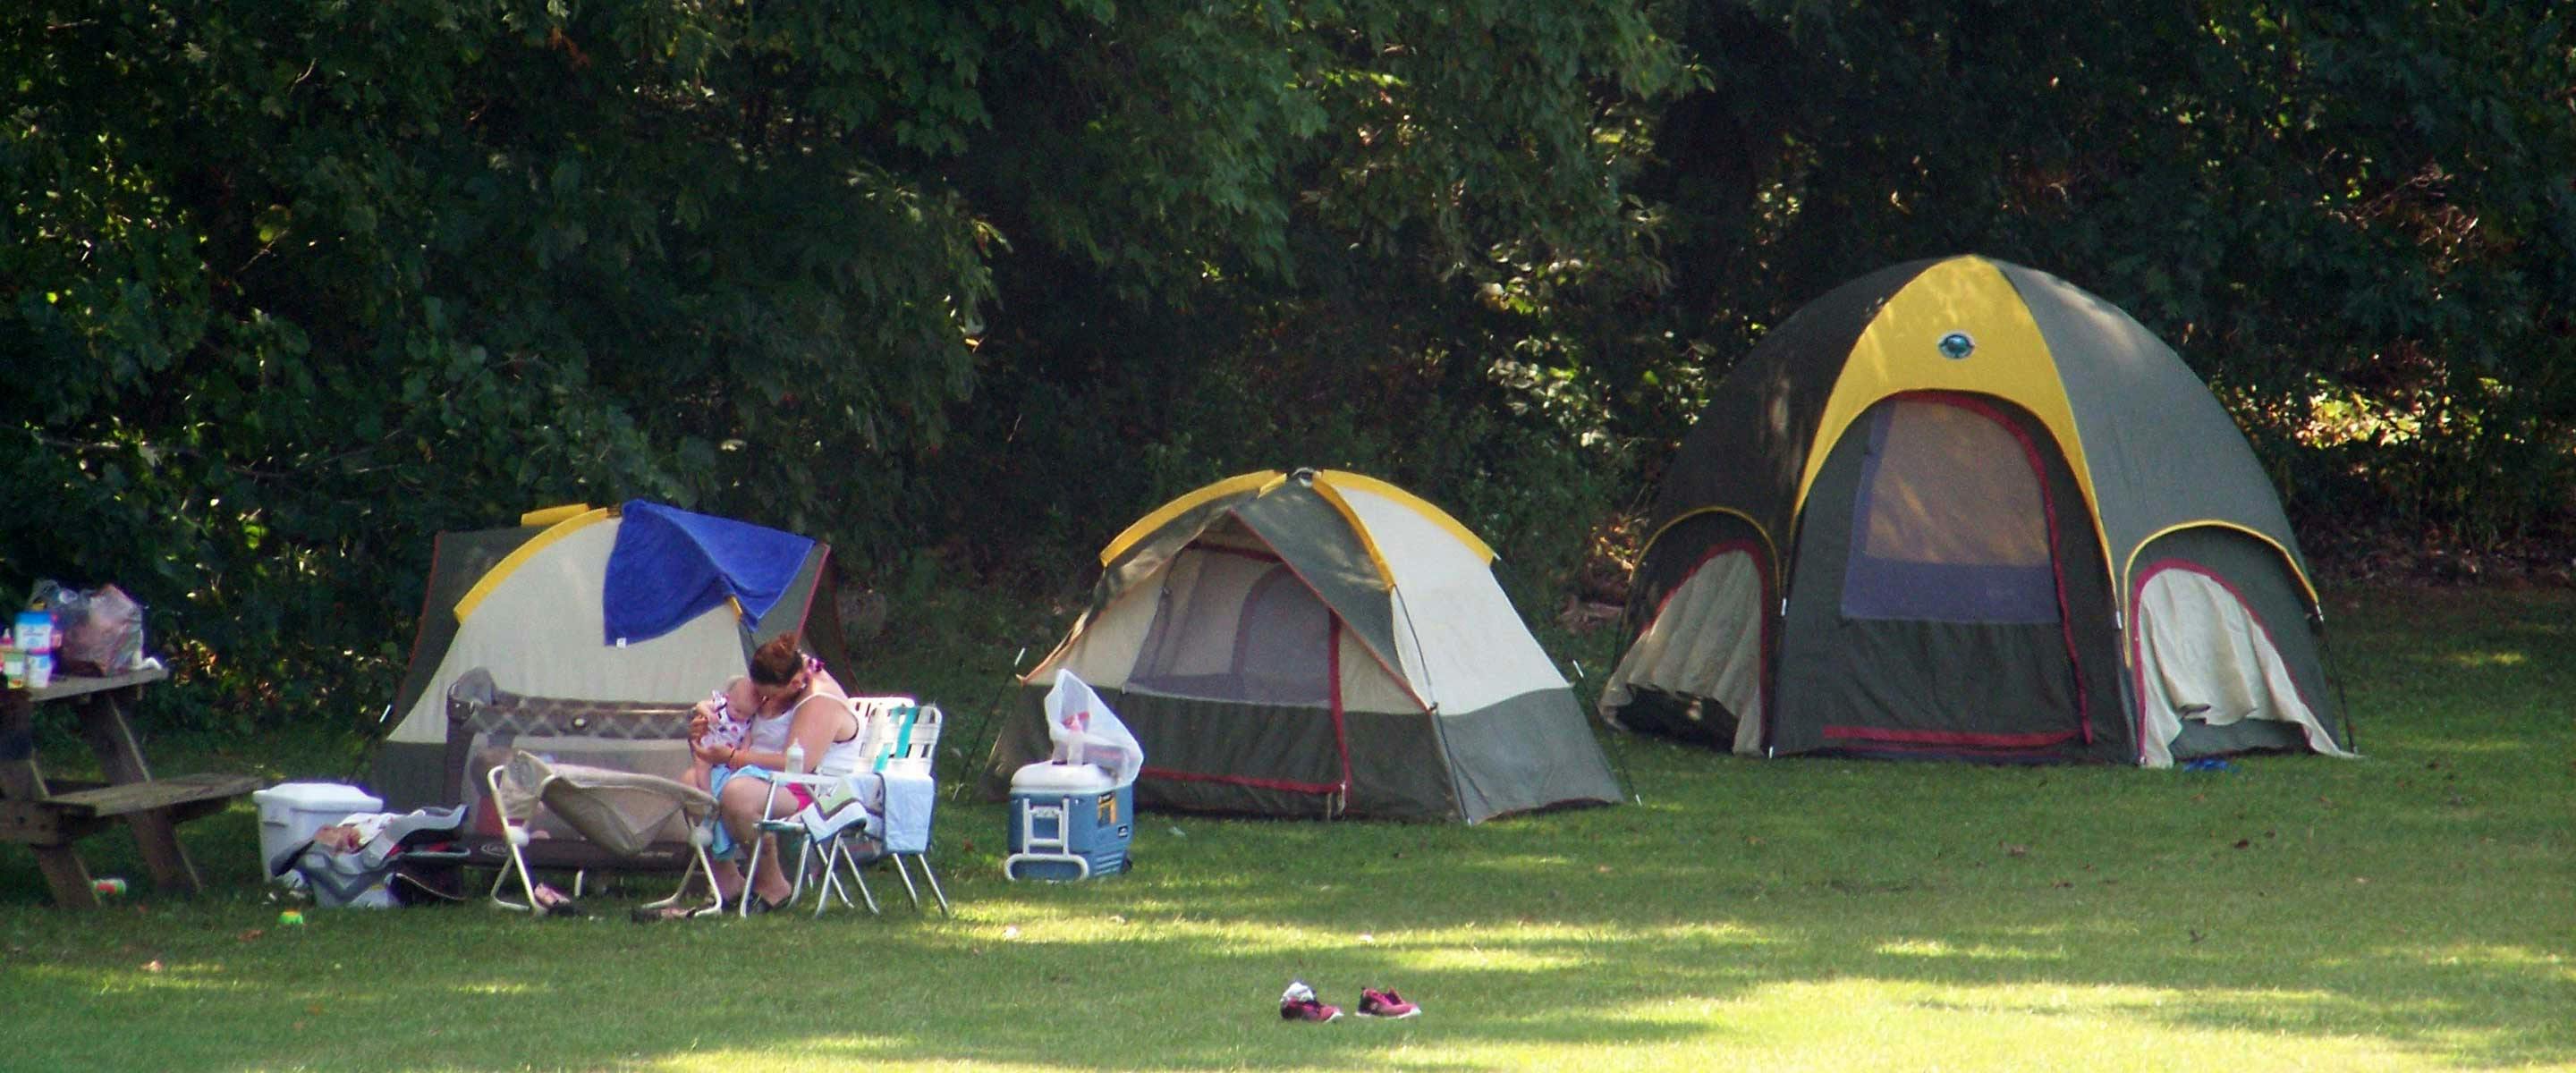 tent setup against the forrest backdrop in the primitive campground